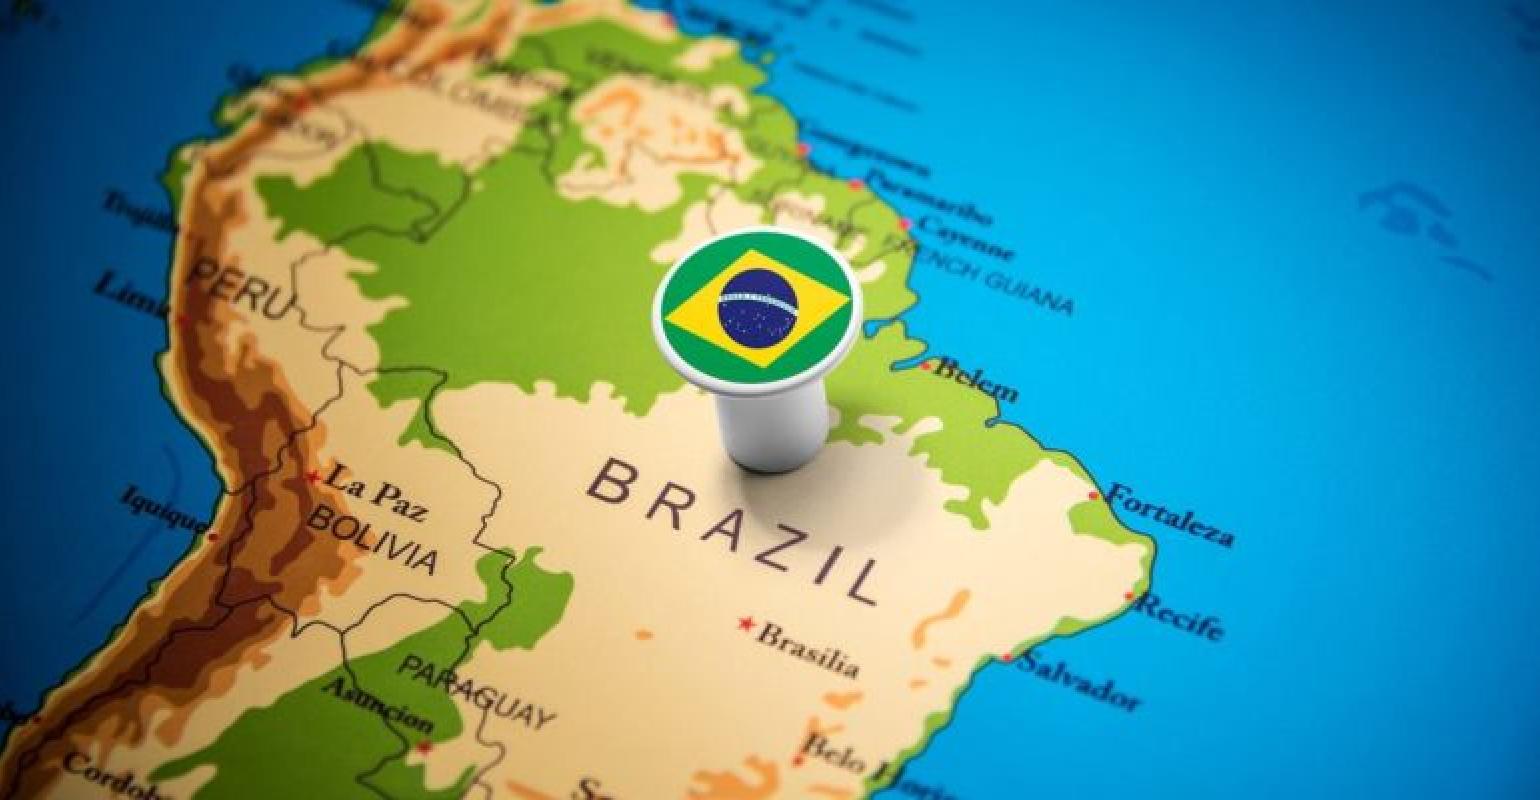 Brazilian financial analysts upgraded their economic growth forecast for the year, from a 3.45 percent expansion in gross domestic product (GDP) to 3.49 percent, the Central Bank of Brazil said on Monday, January 25th.